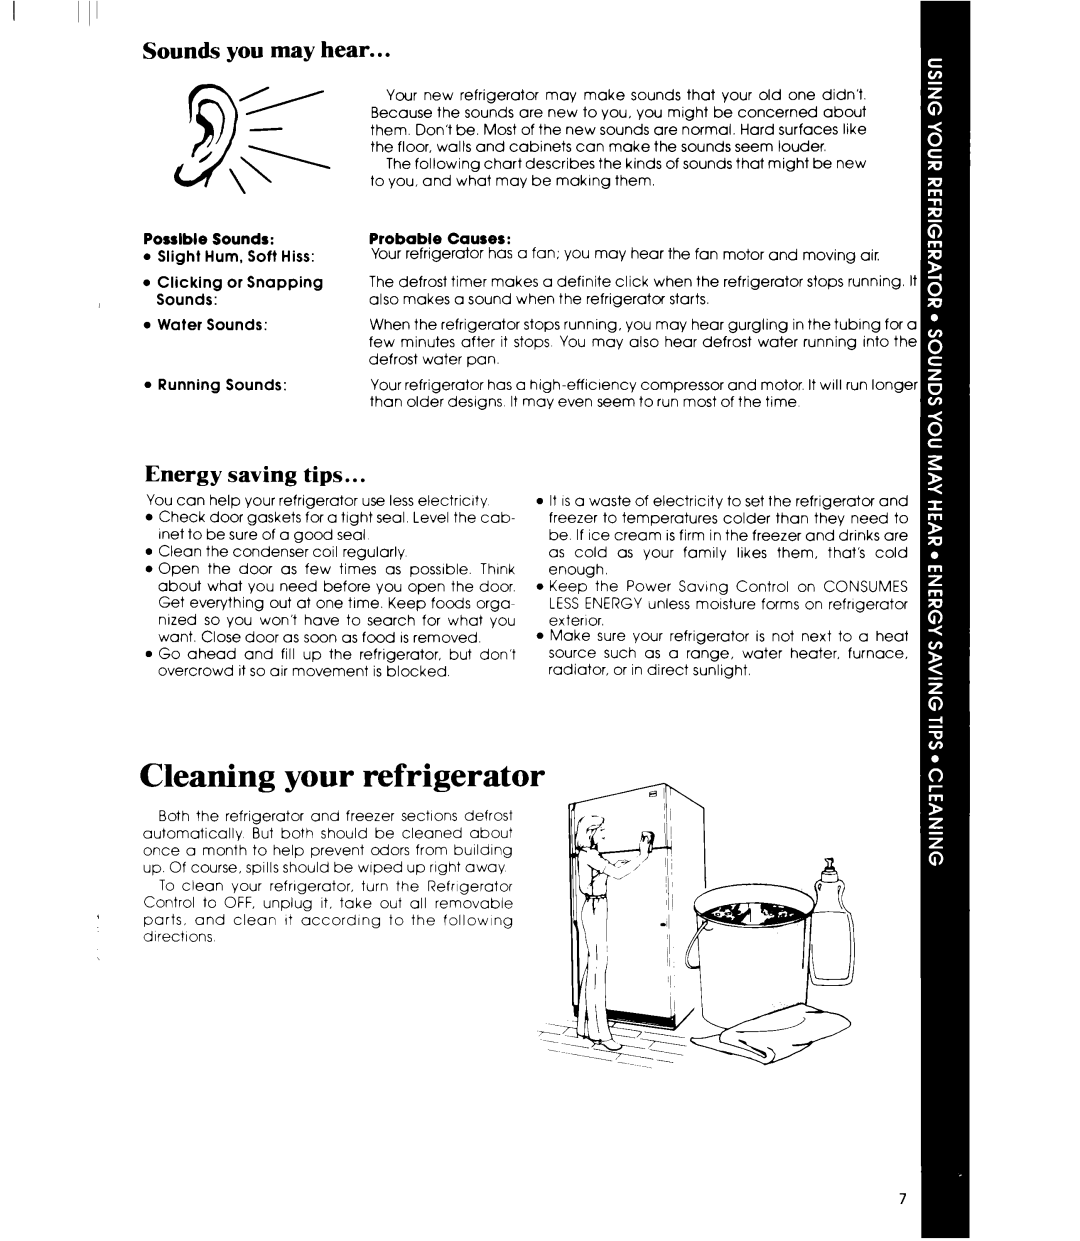 Whirlpool ETl8SC manual Cleaning your refrigerator, Sounds you may heaI, Energy saving tips, Probable, Causes, ’ ,.+ 